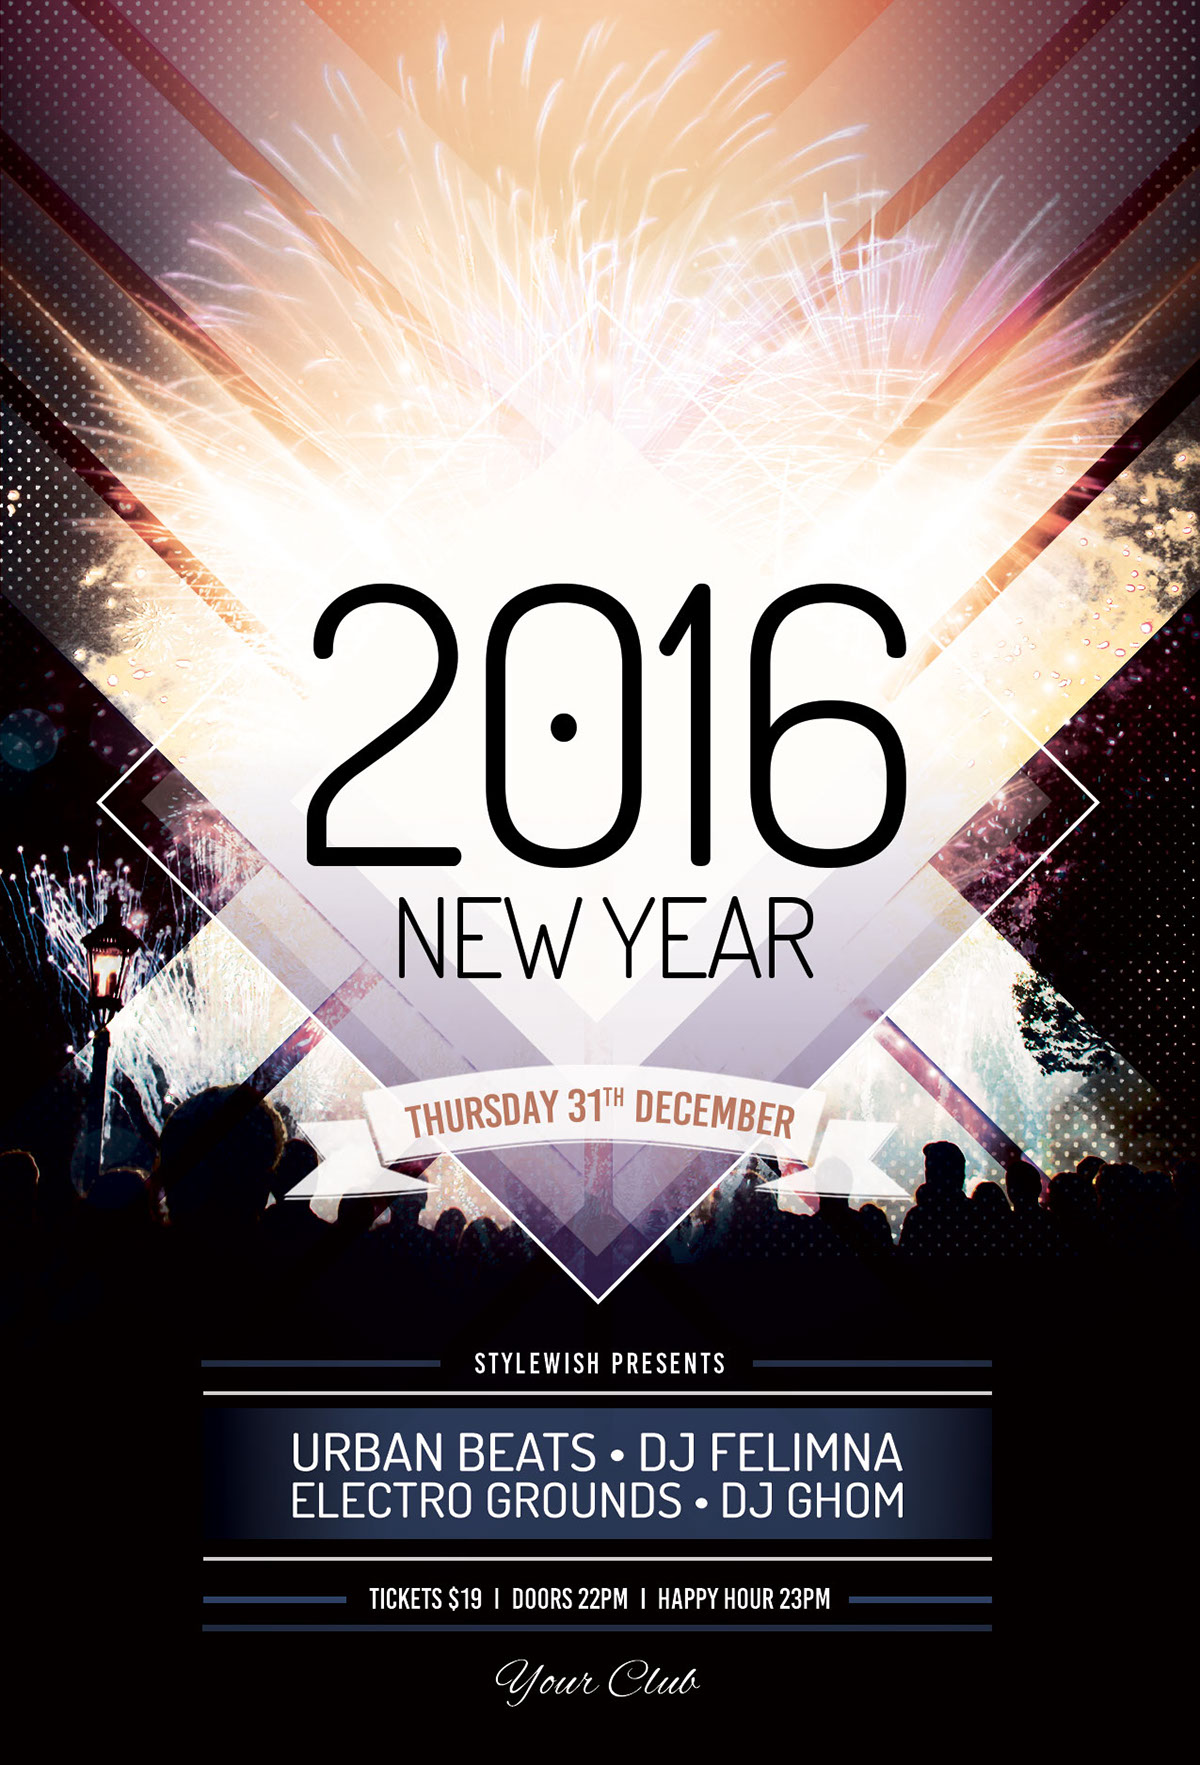 new year poster new years Eve New Year Party Nye flyer celebration celebrate firework fireworks glow lights night crowd